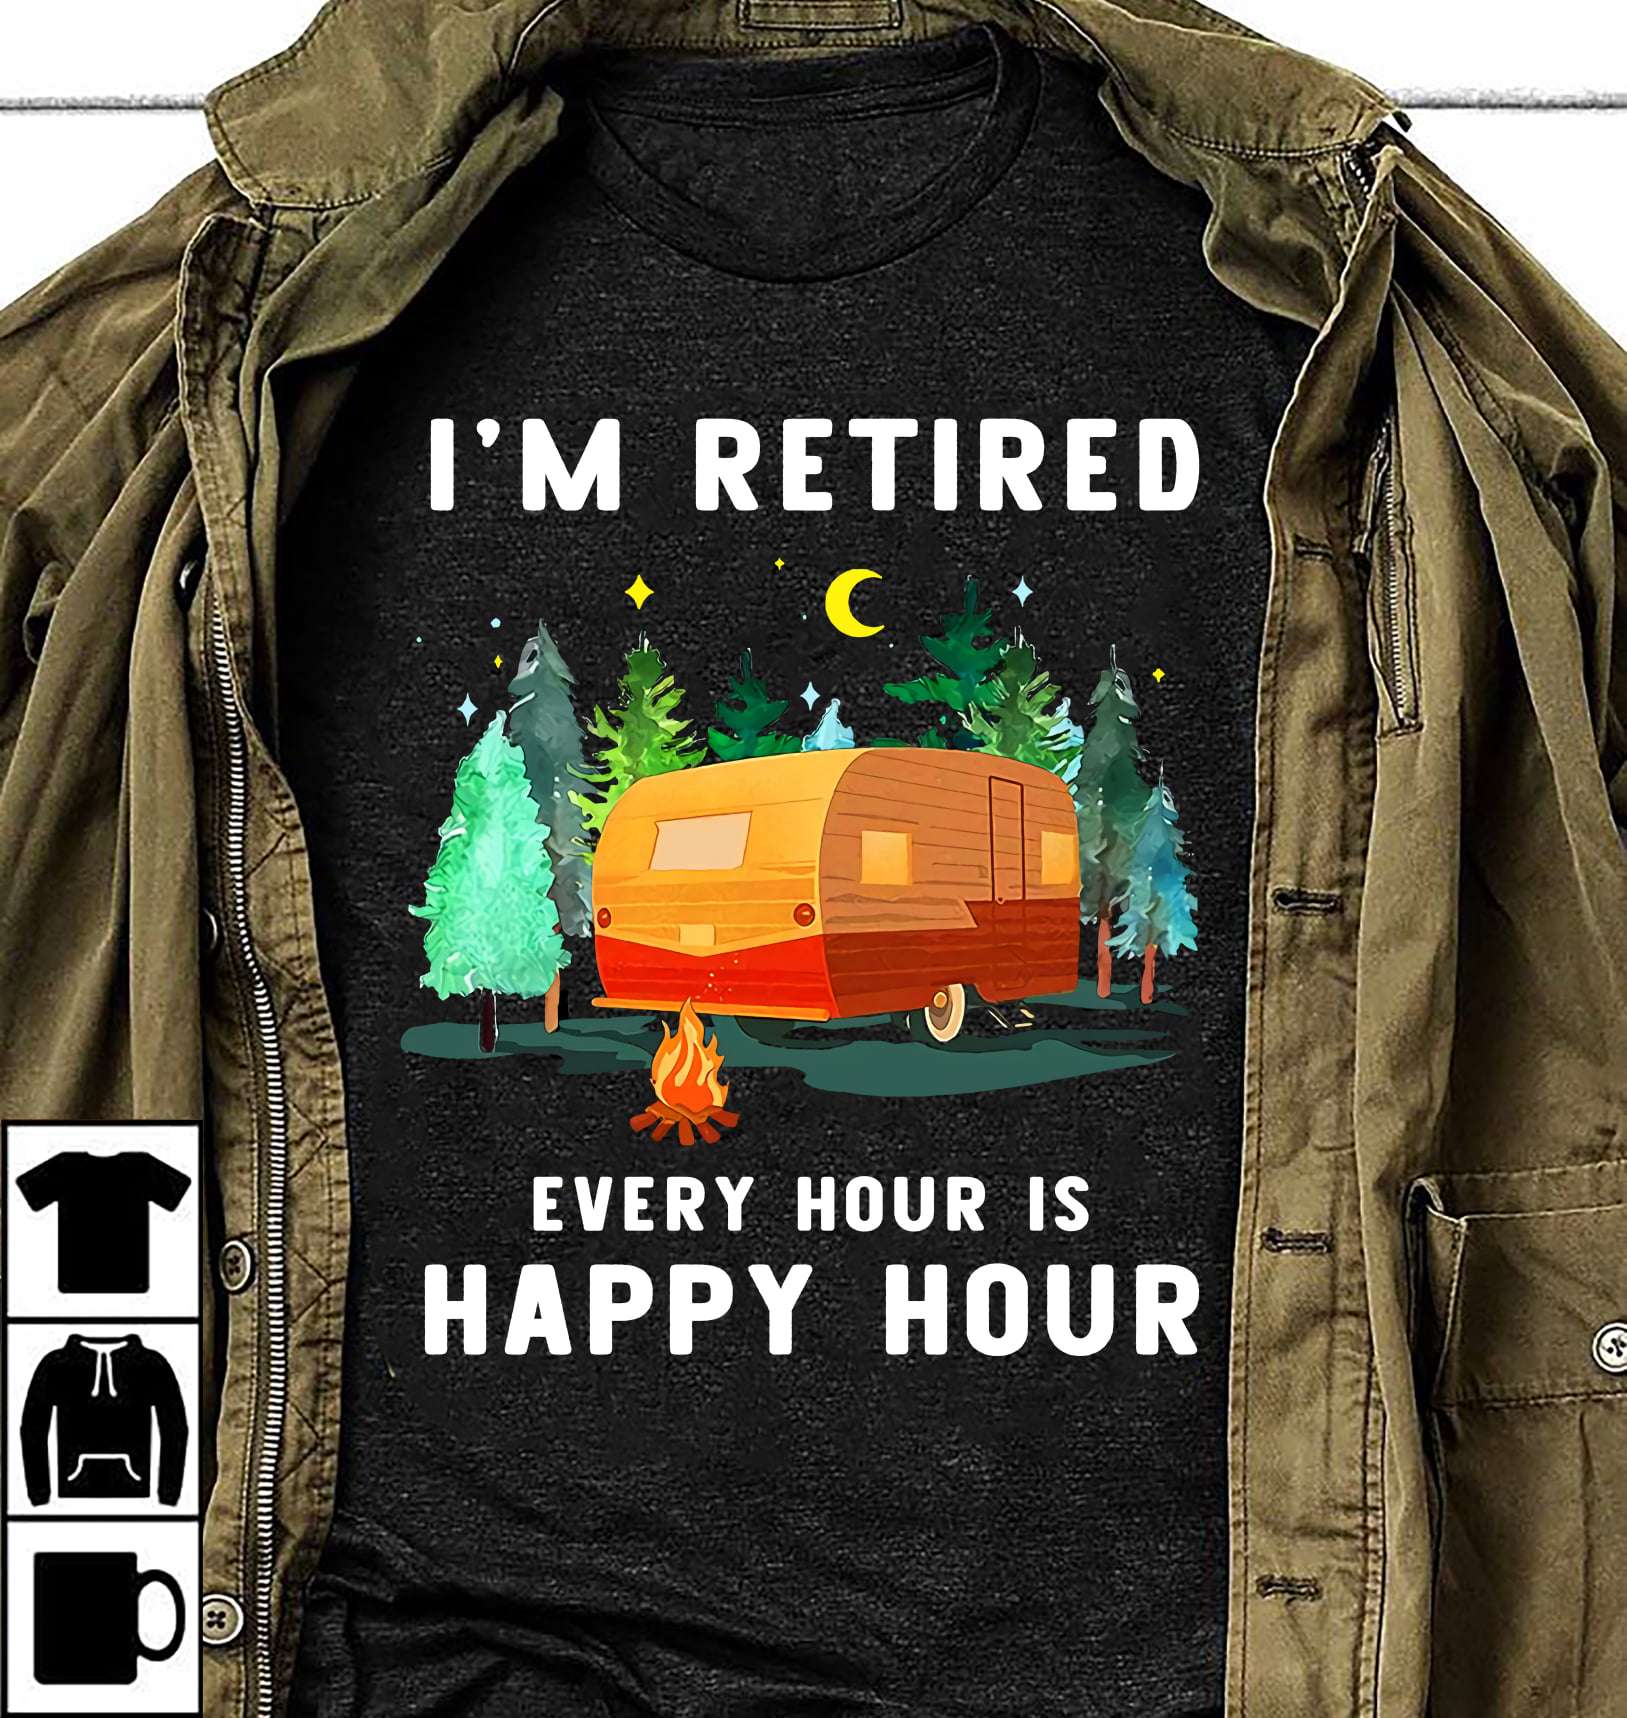 I'm retired, every hour is happy hour - Camping hour, camping in the wood